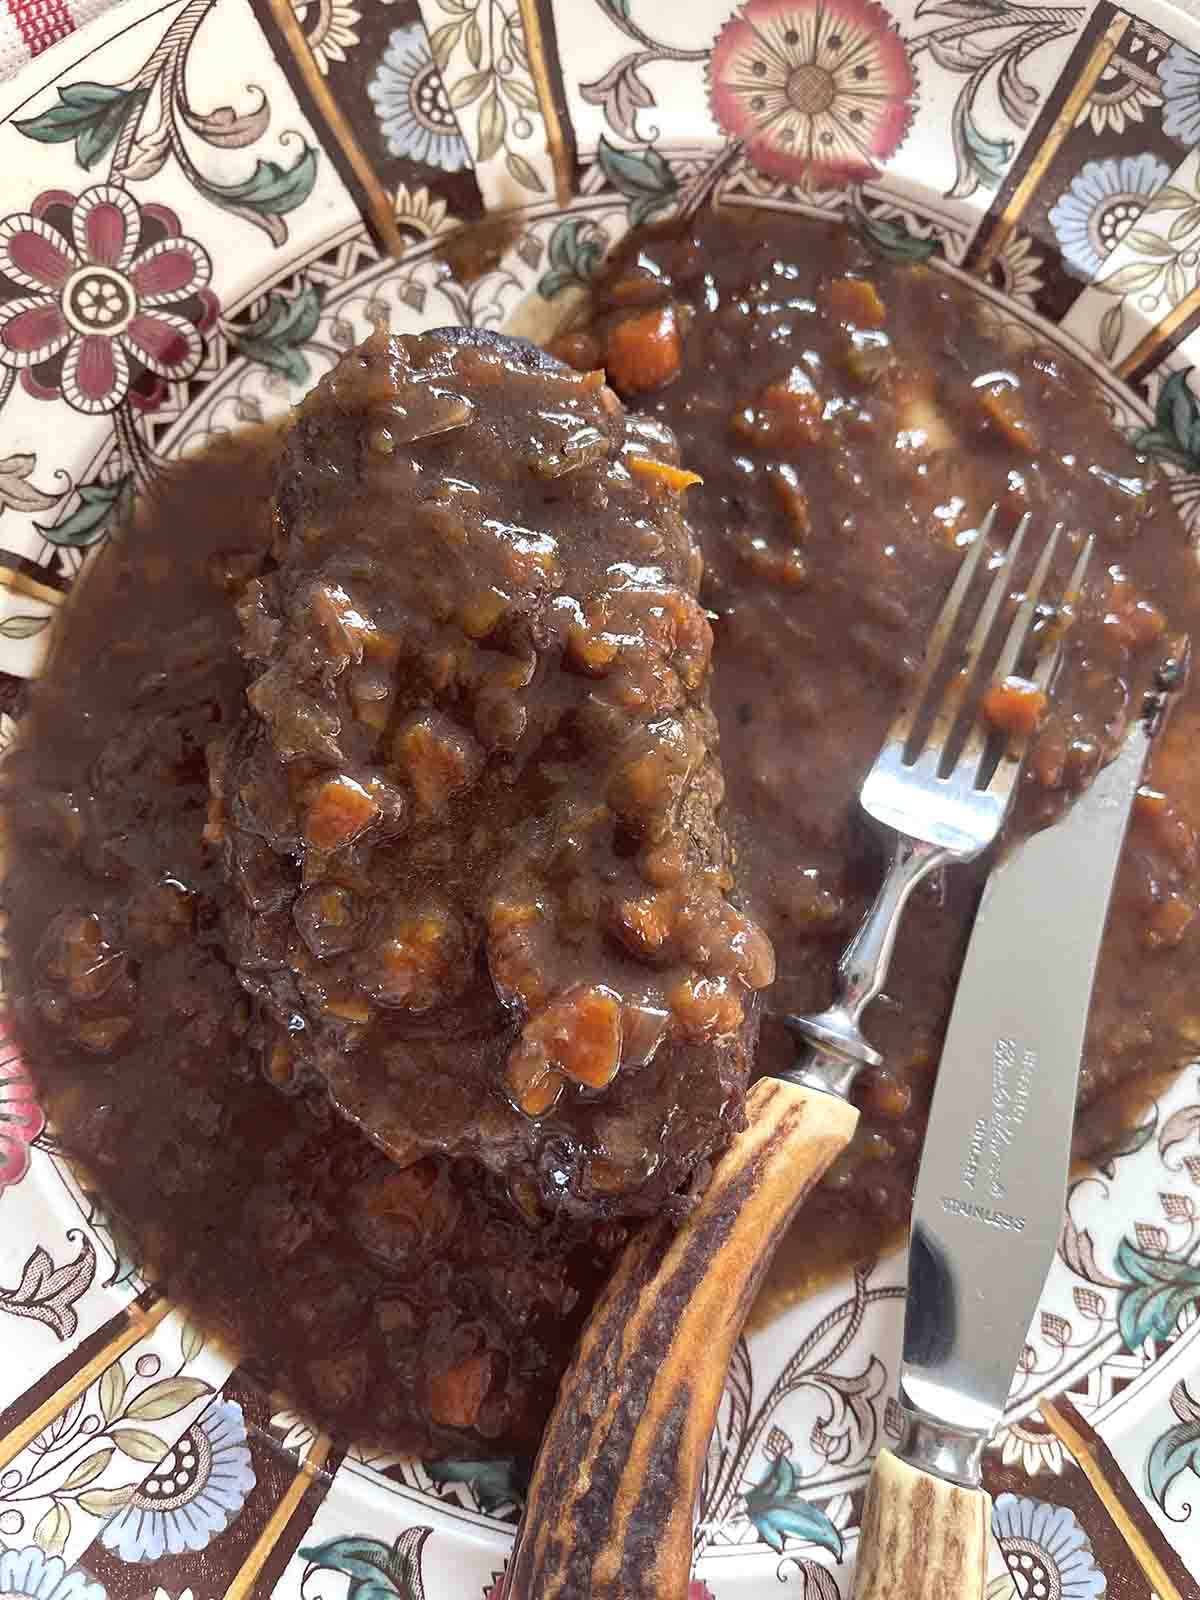 featherblade steak and gravy on a plate.